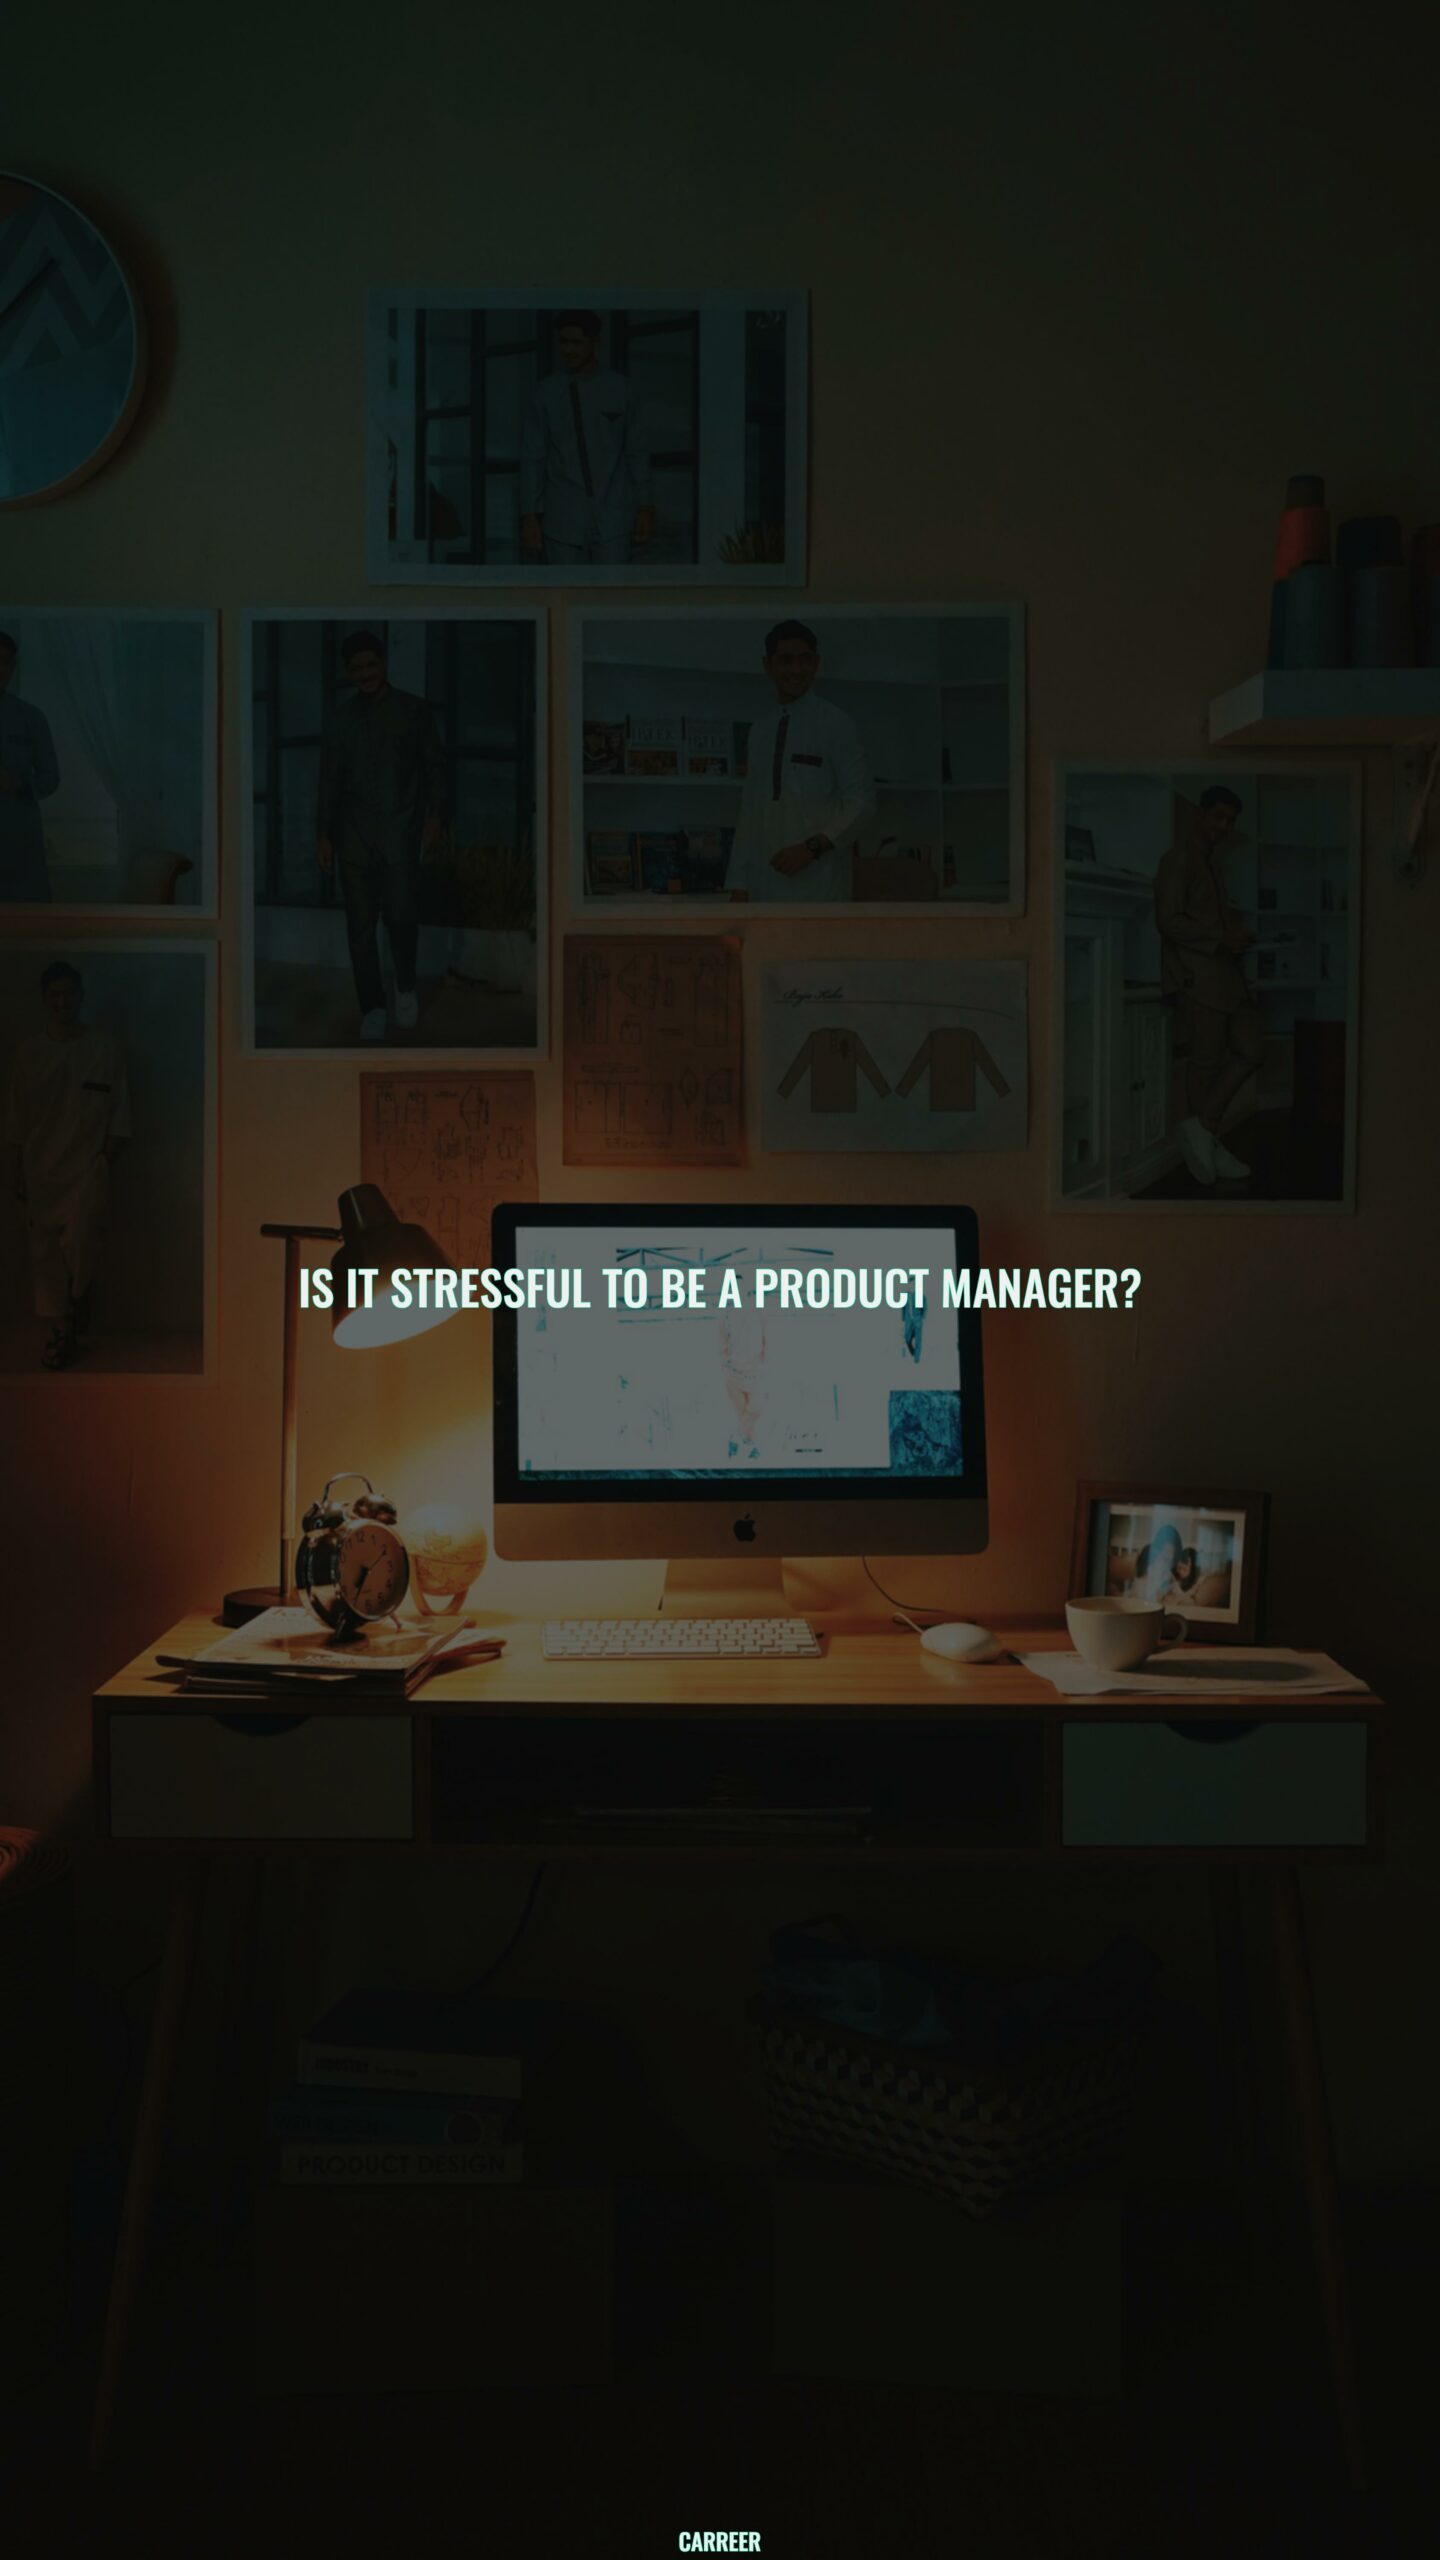 Is it stressful to be a product manager?